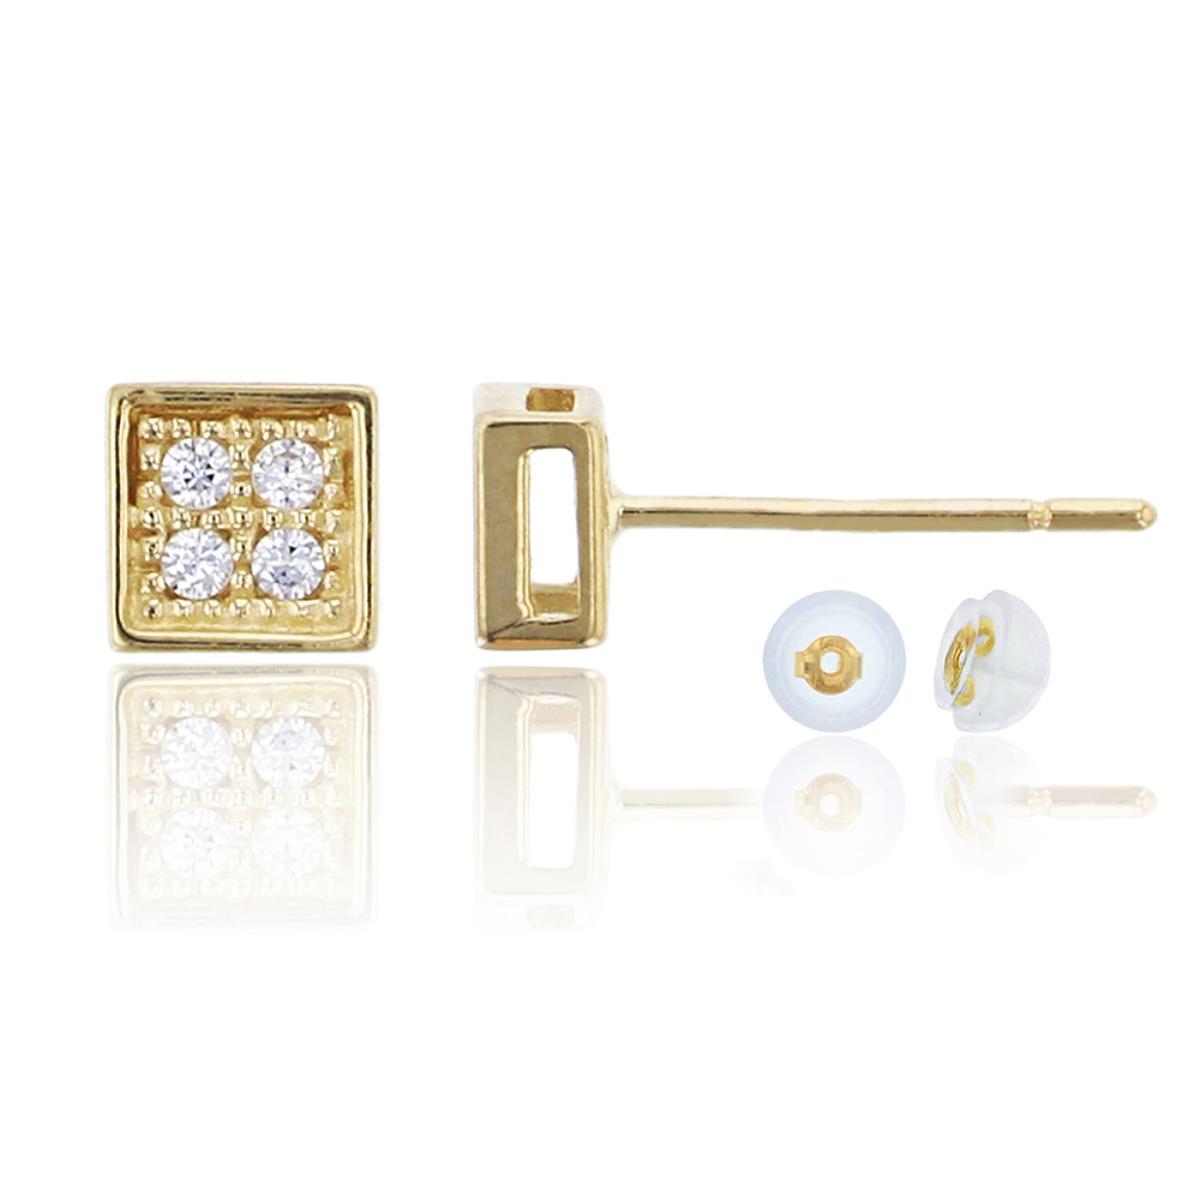 10K Yellow Gold Pave Small Square Stud Earring & 10K Silicone Back